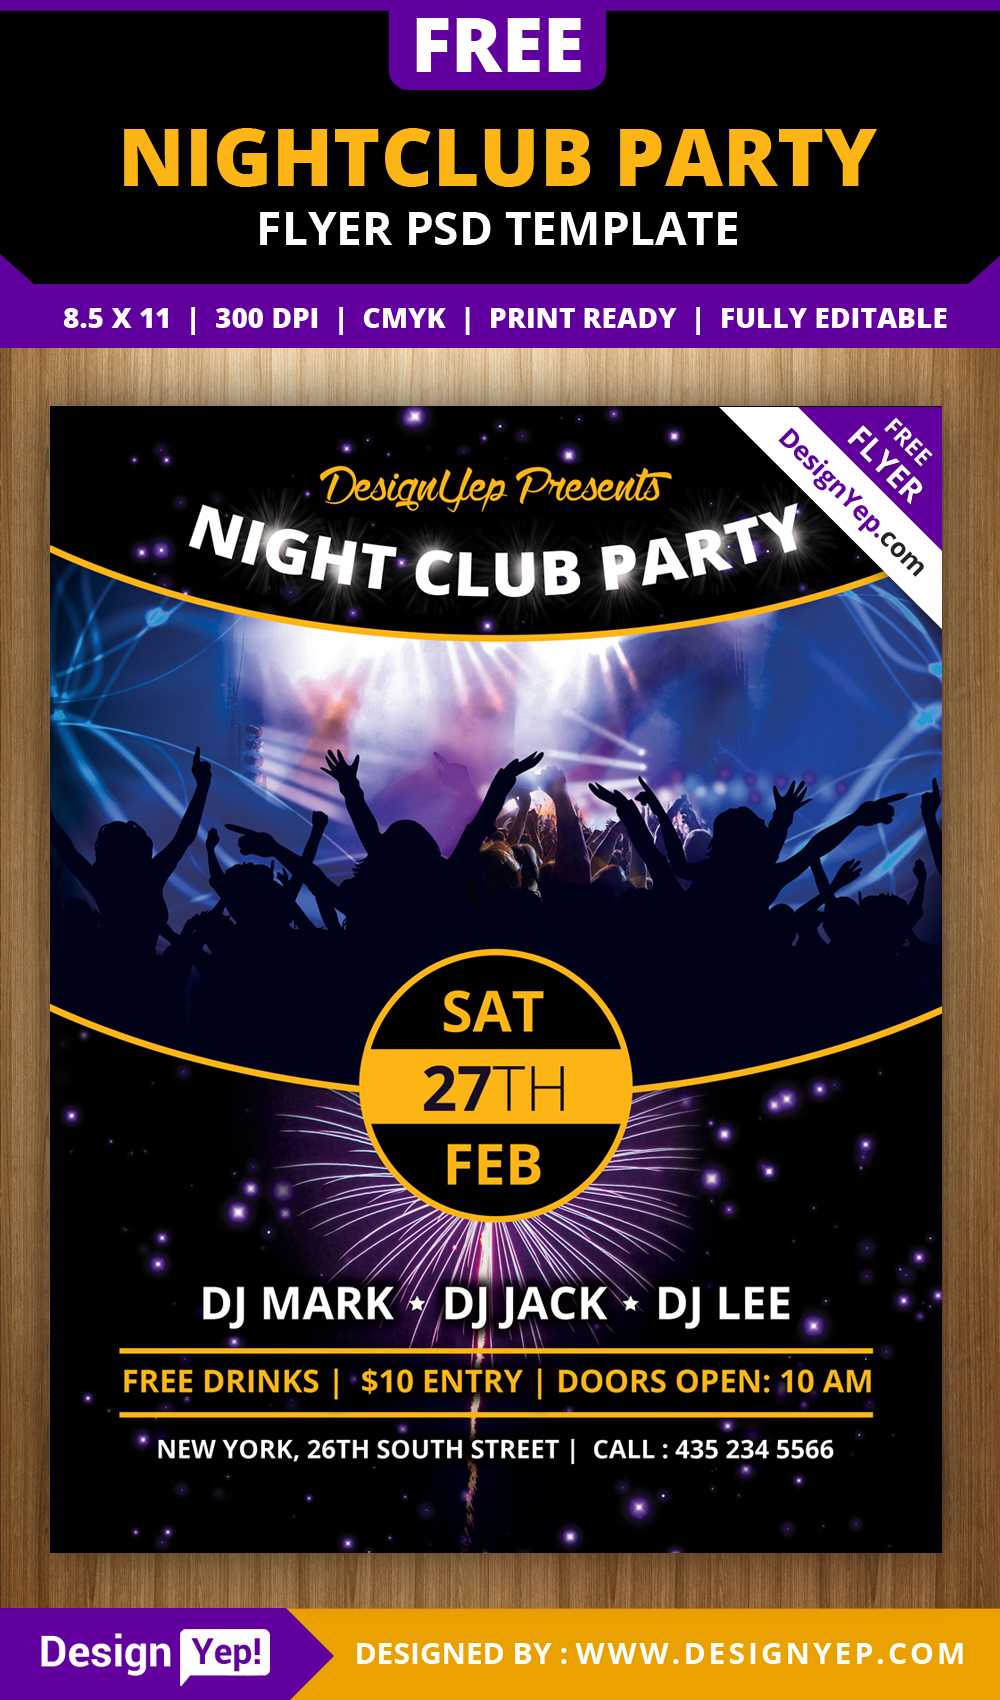 Free Nightclub Party Flyer Psd Template – Designyep In Free Nightclub Flyer Templates